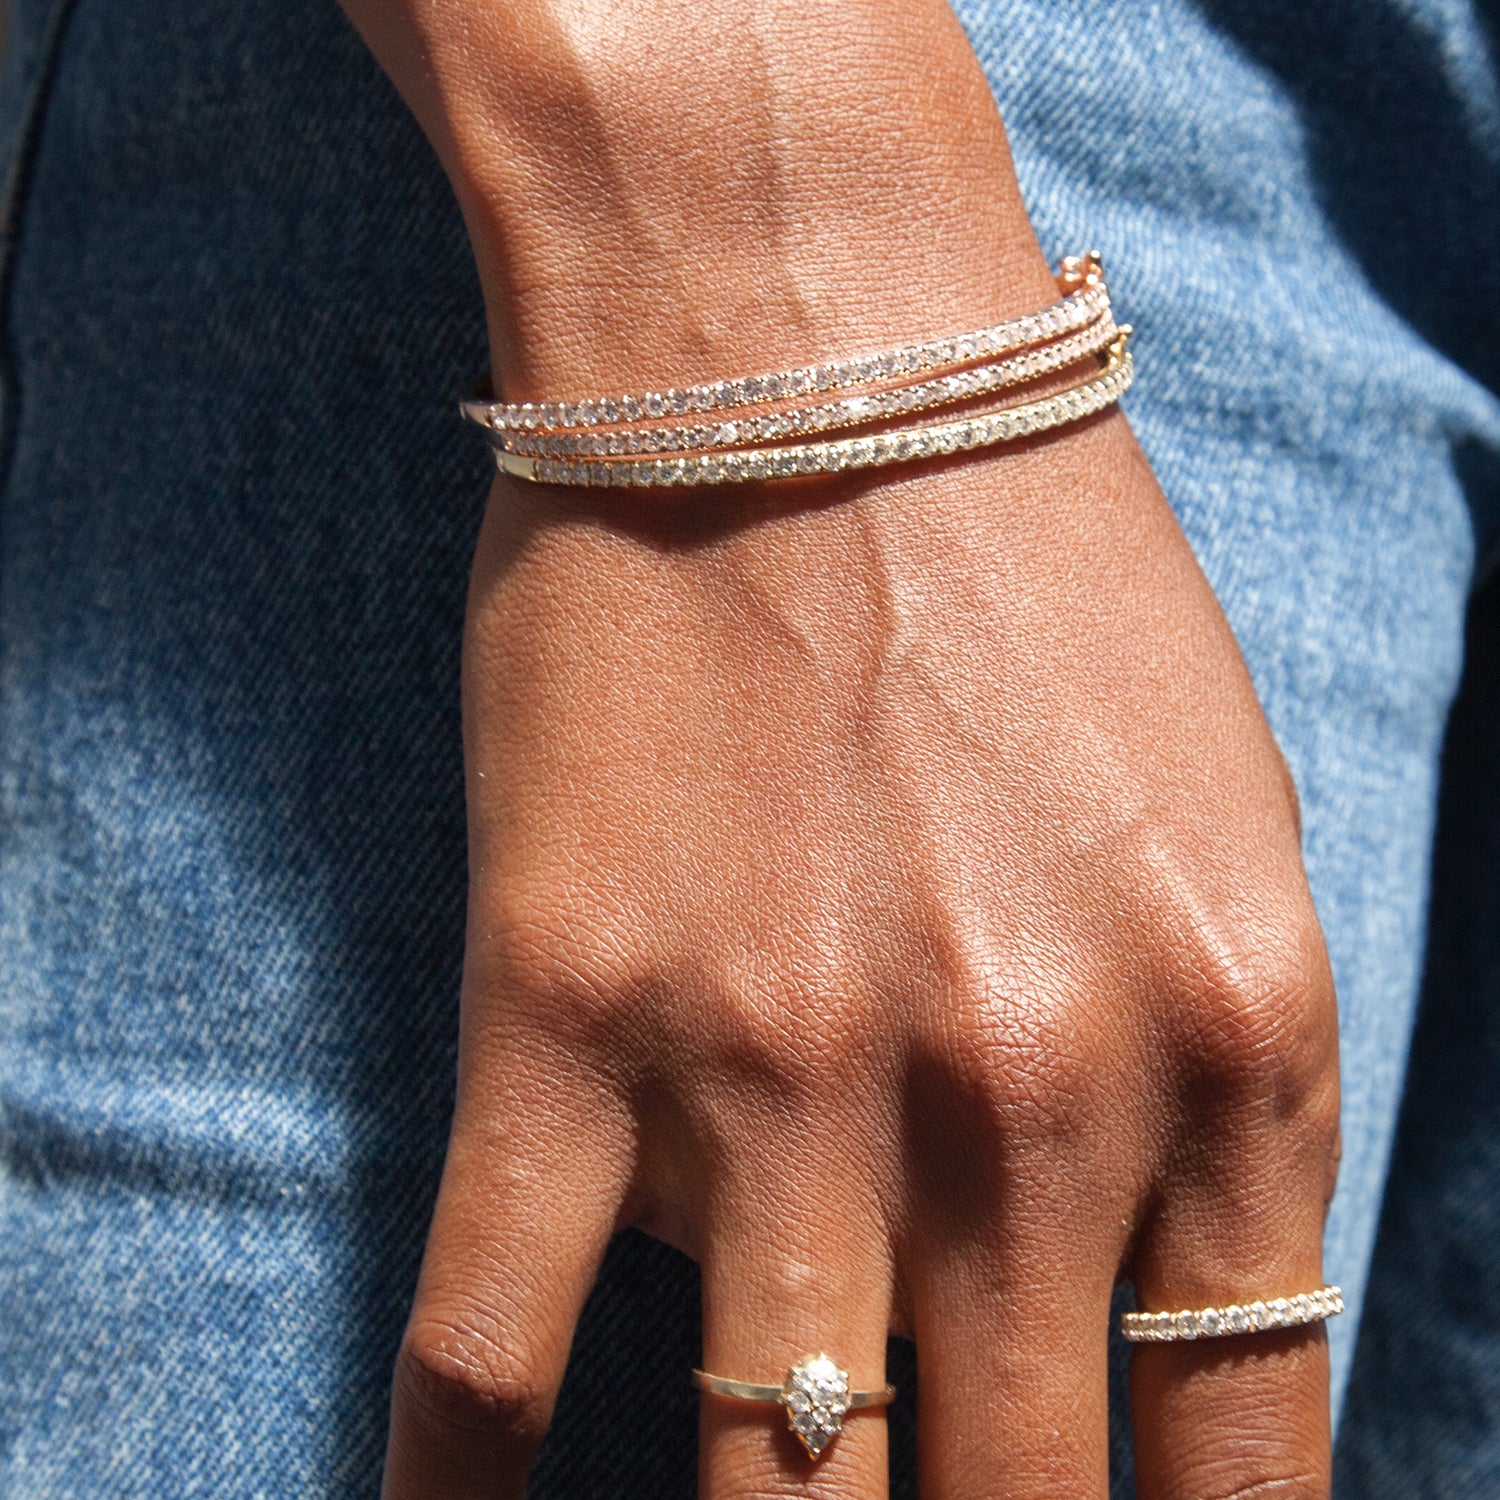 Here, all three colors of the Classic Diamond Bangle are shown stacked together for extra sparkle.